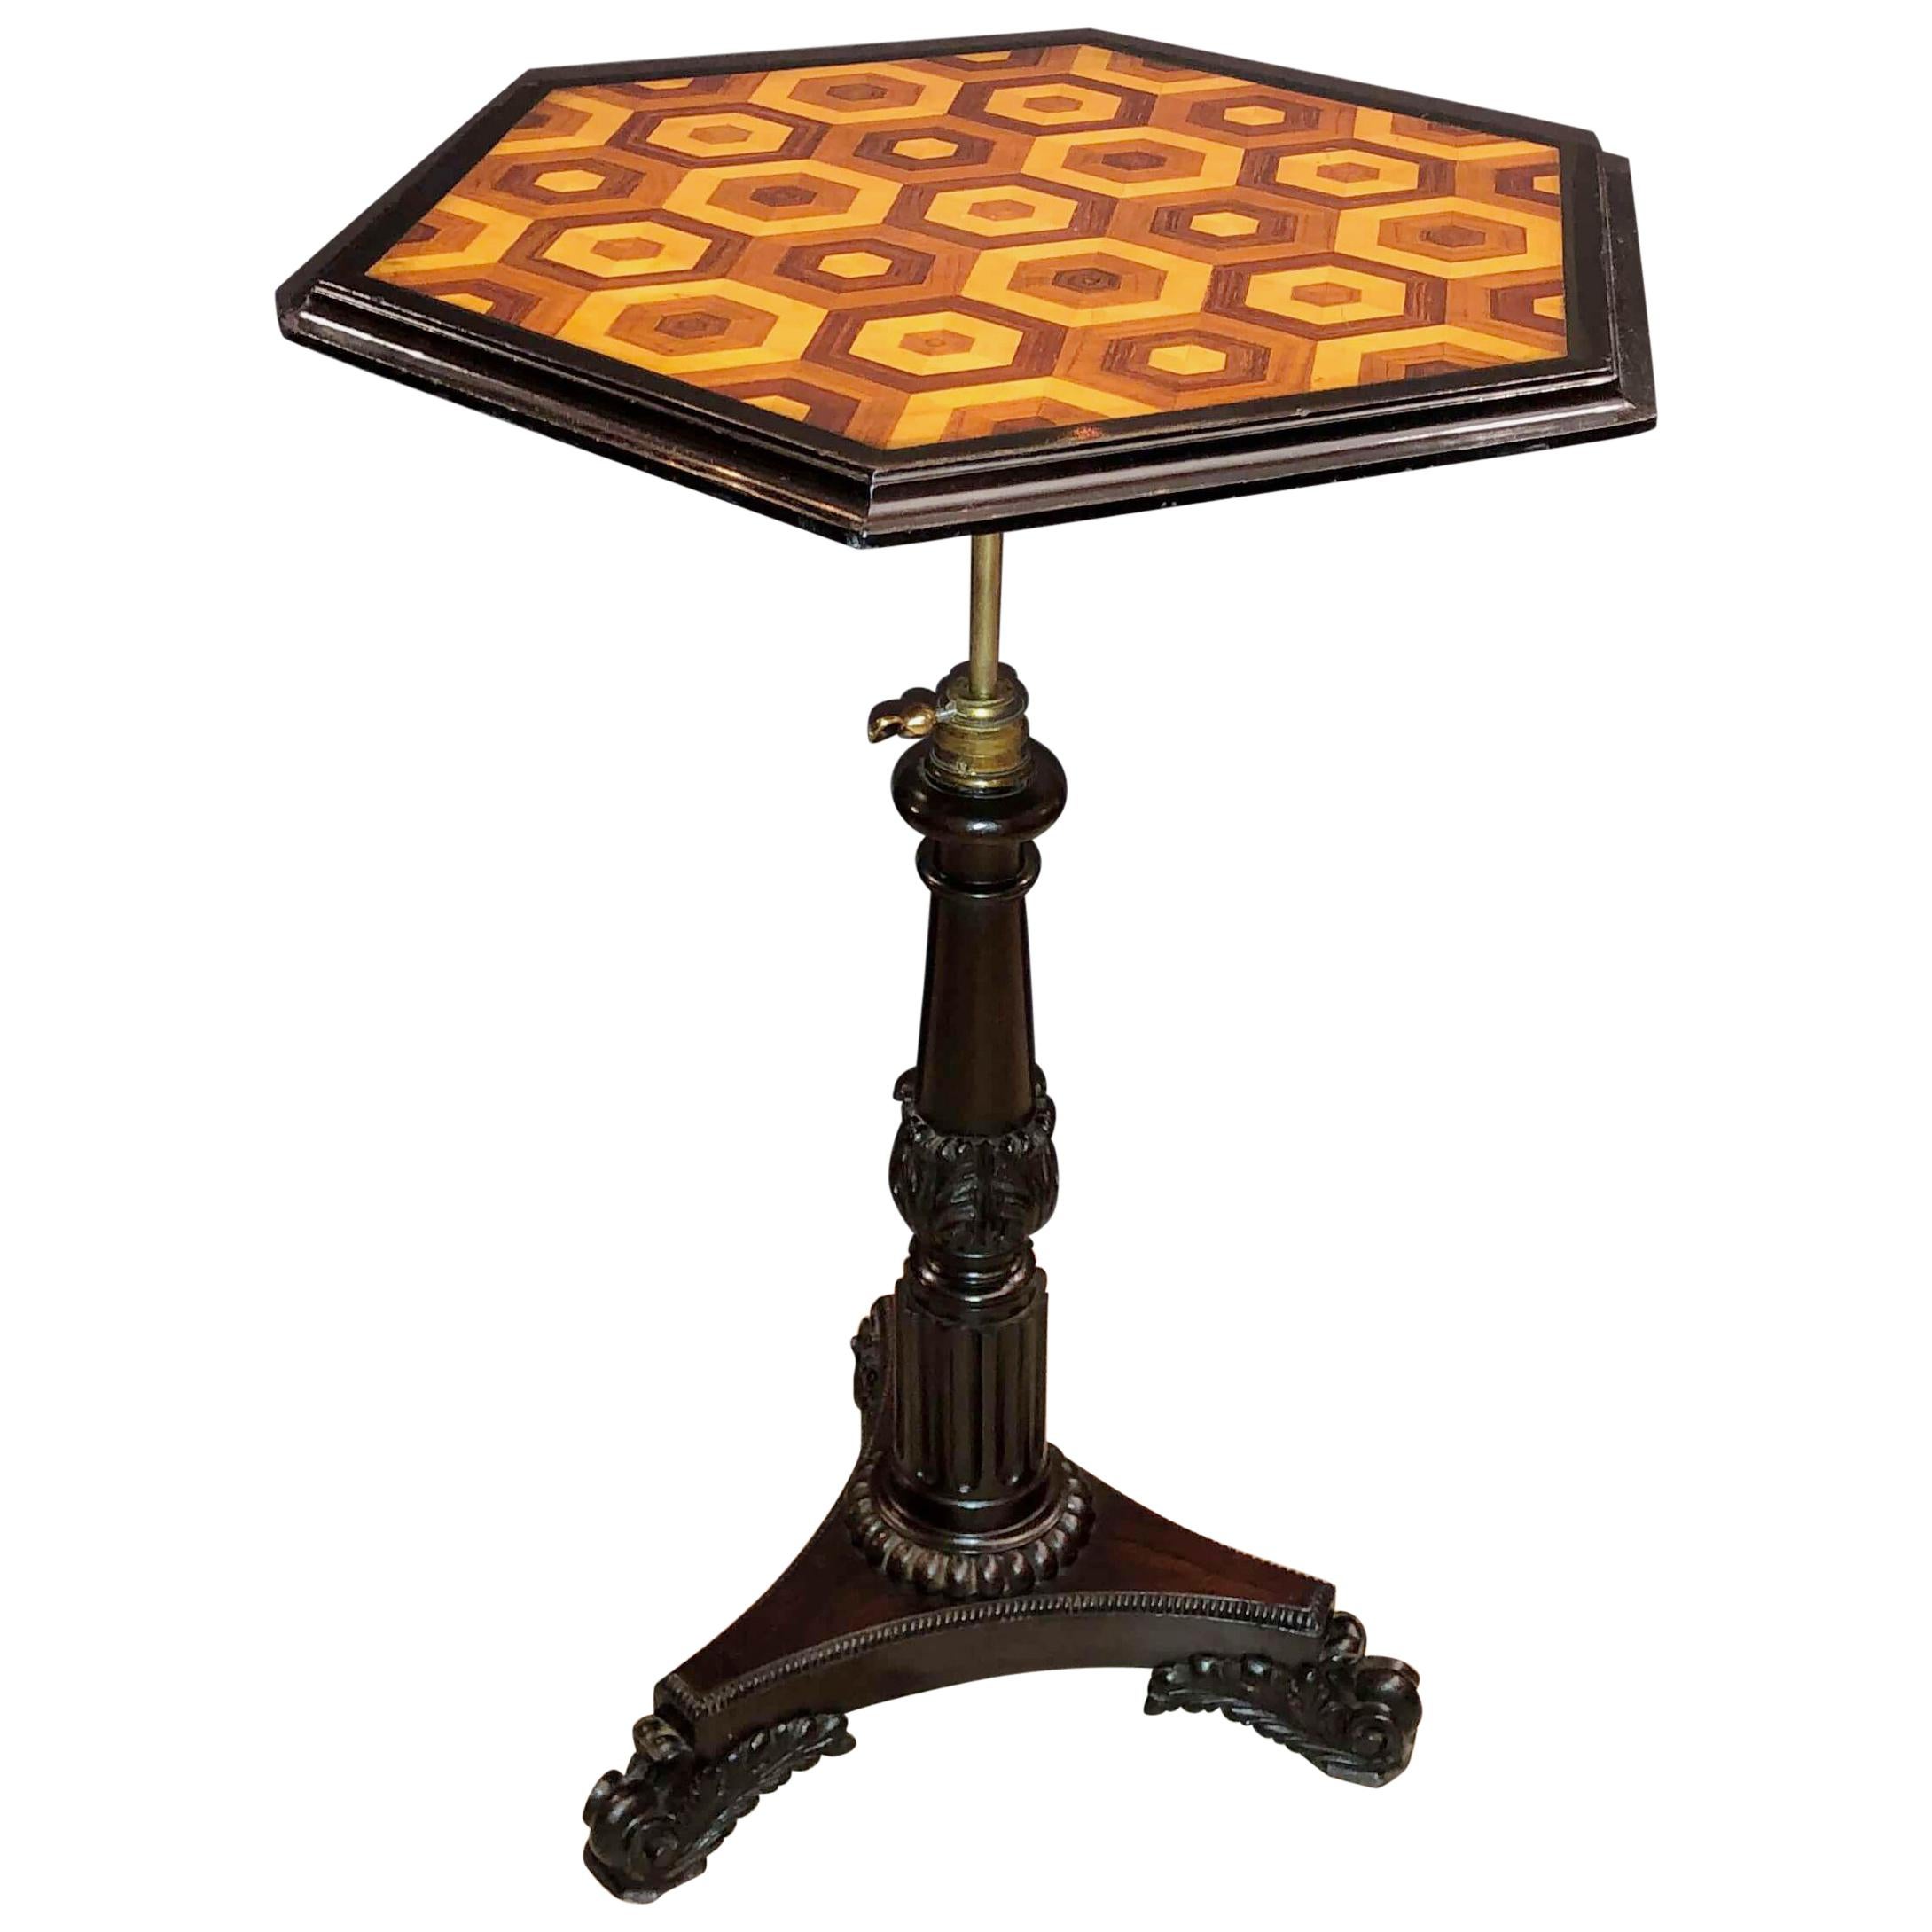 Late Regency Parquetry Stand